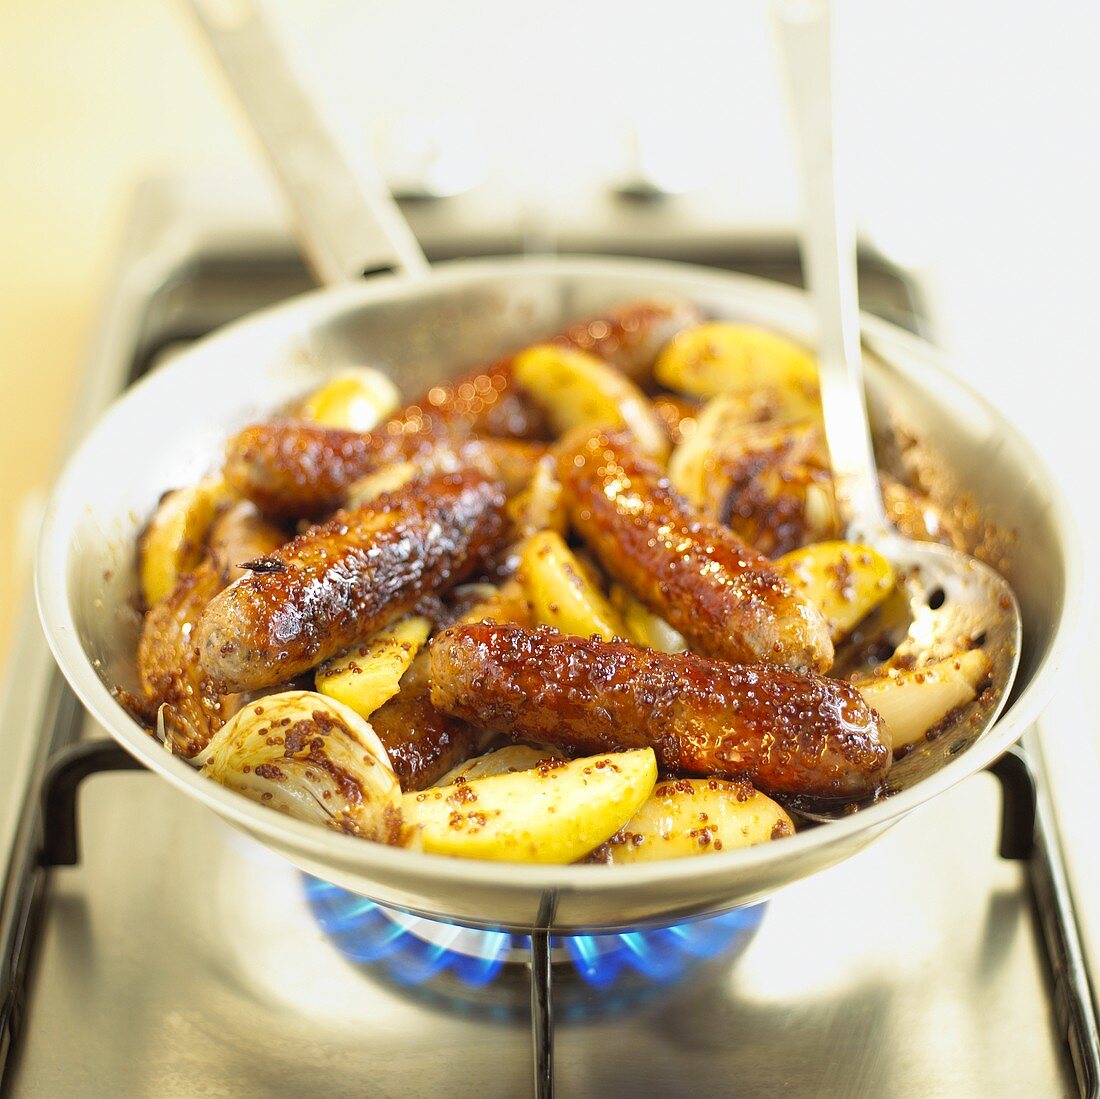 Fried sausages with apple and mustard